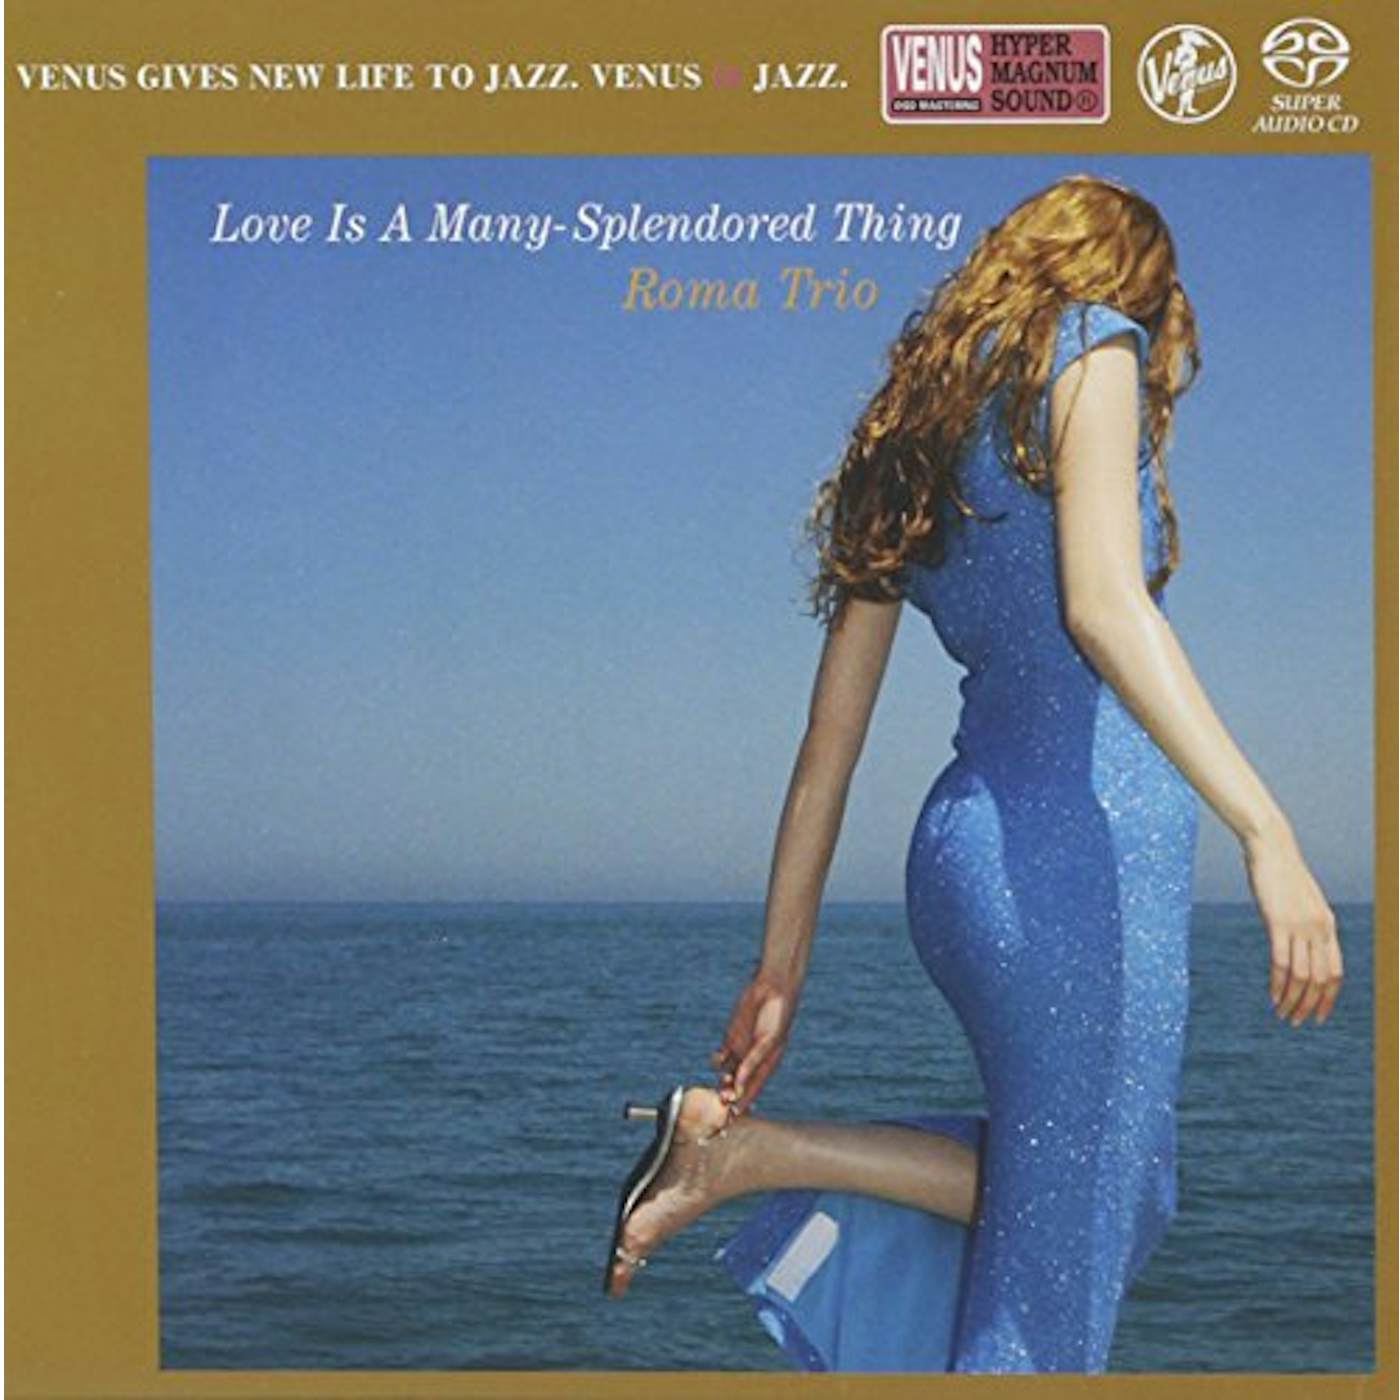 Roma Trio LOVE IS A MANY-SPLENDORED THING Super Audio CD